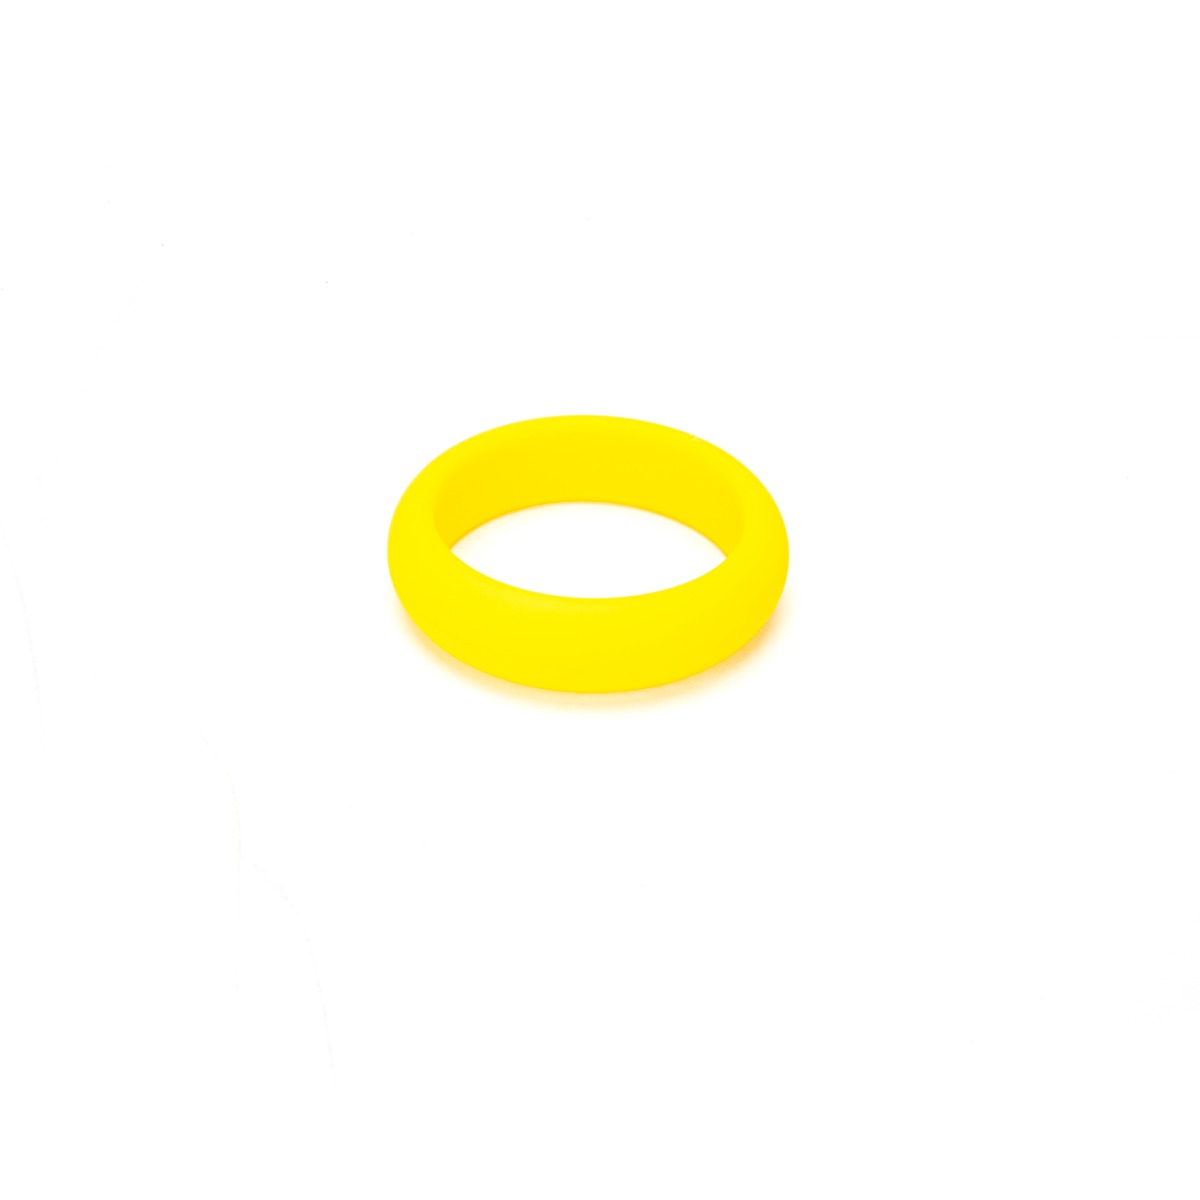 a yellow ring on a white background